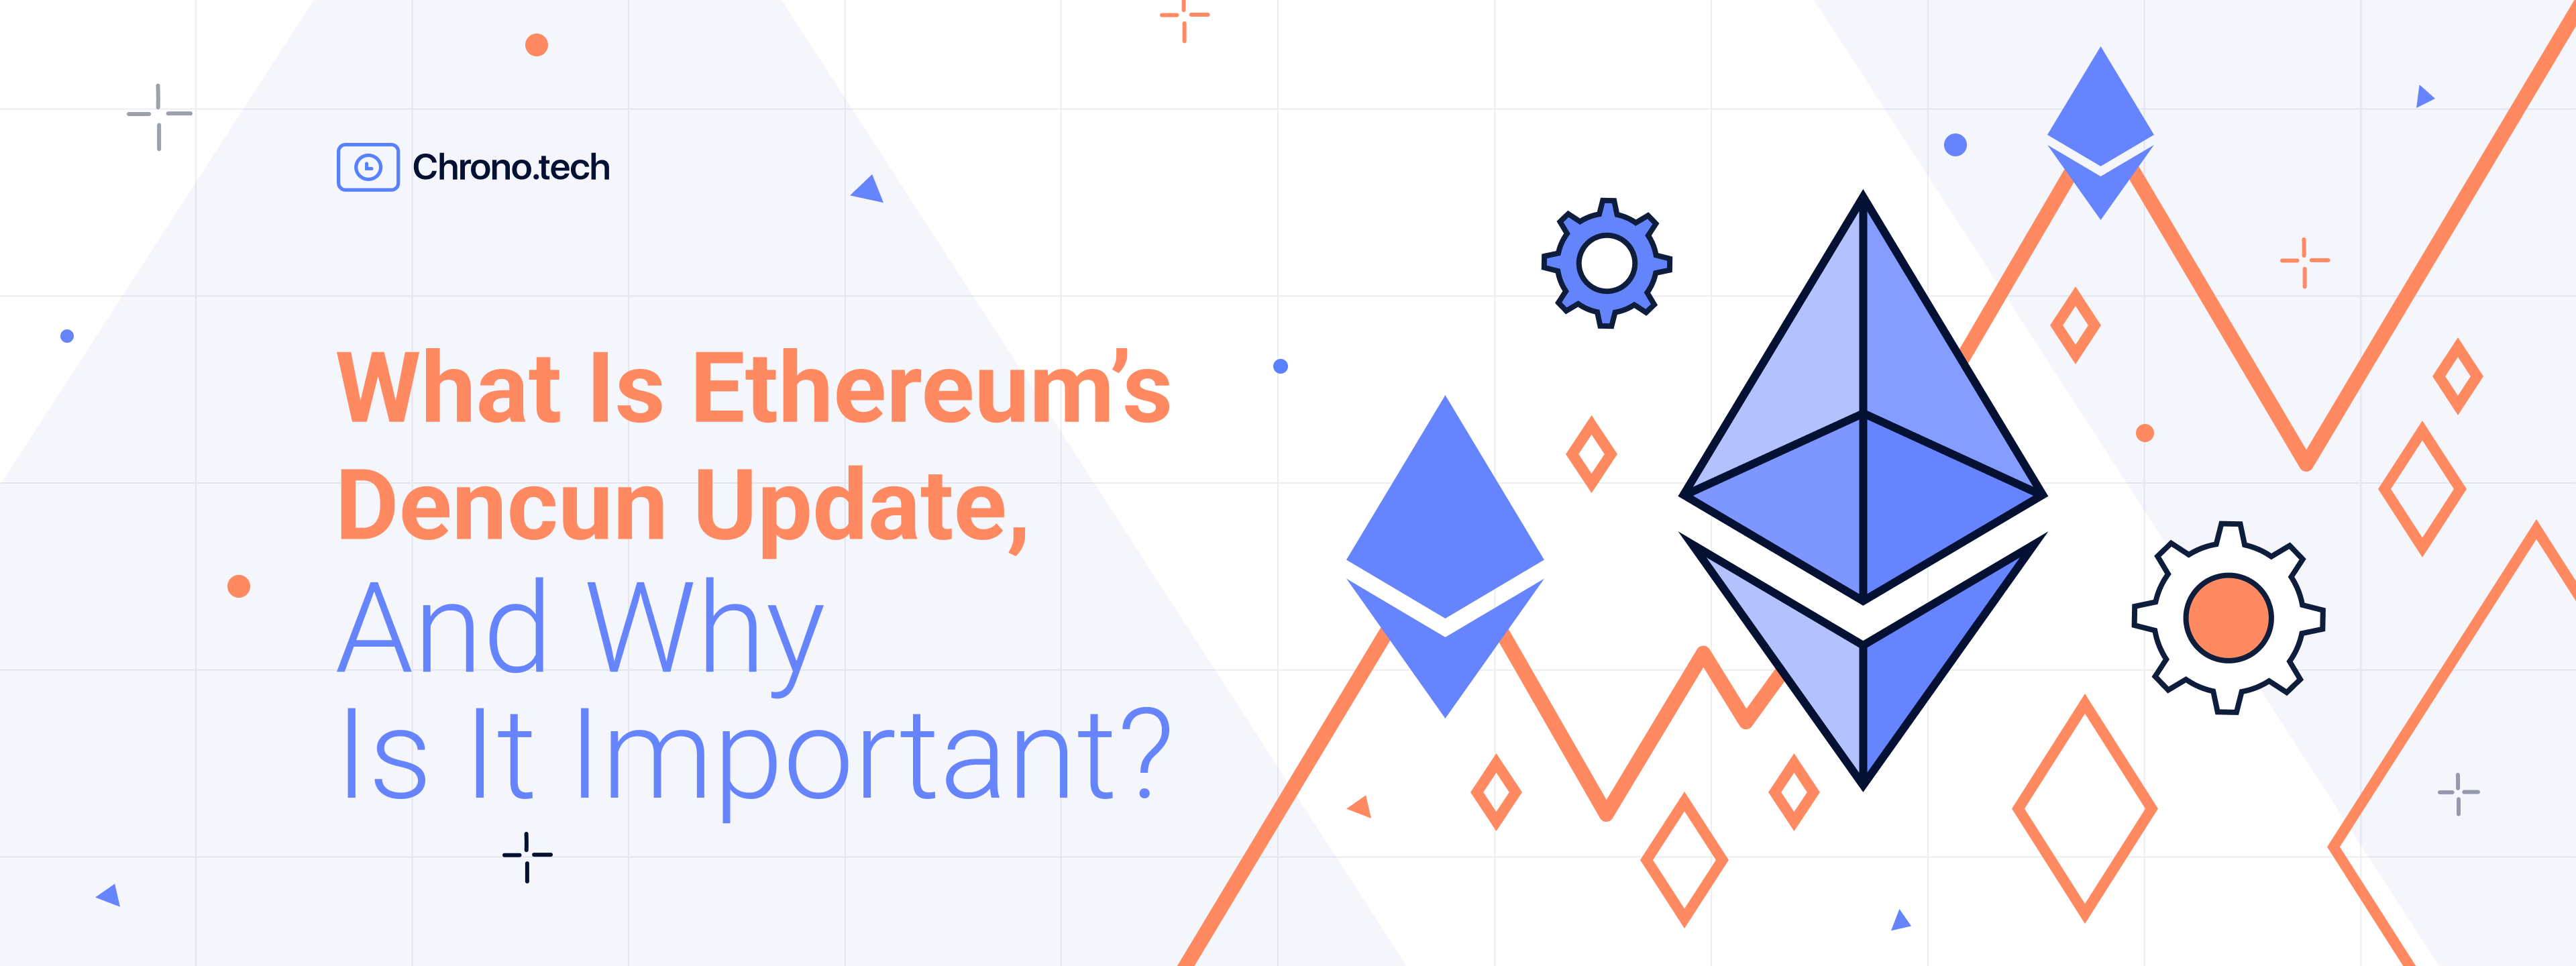 What Is Ethereum’s Dencun Update, And Why Is It Important?